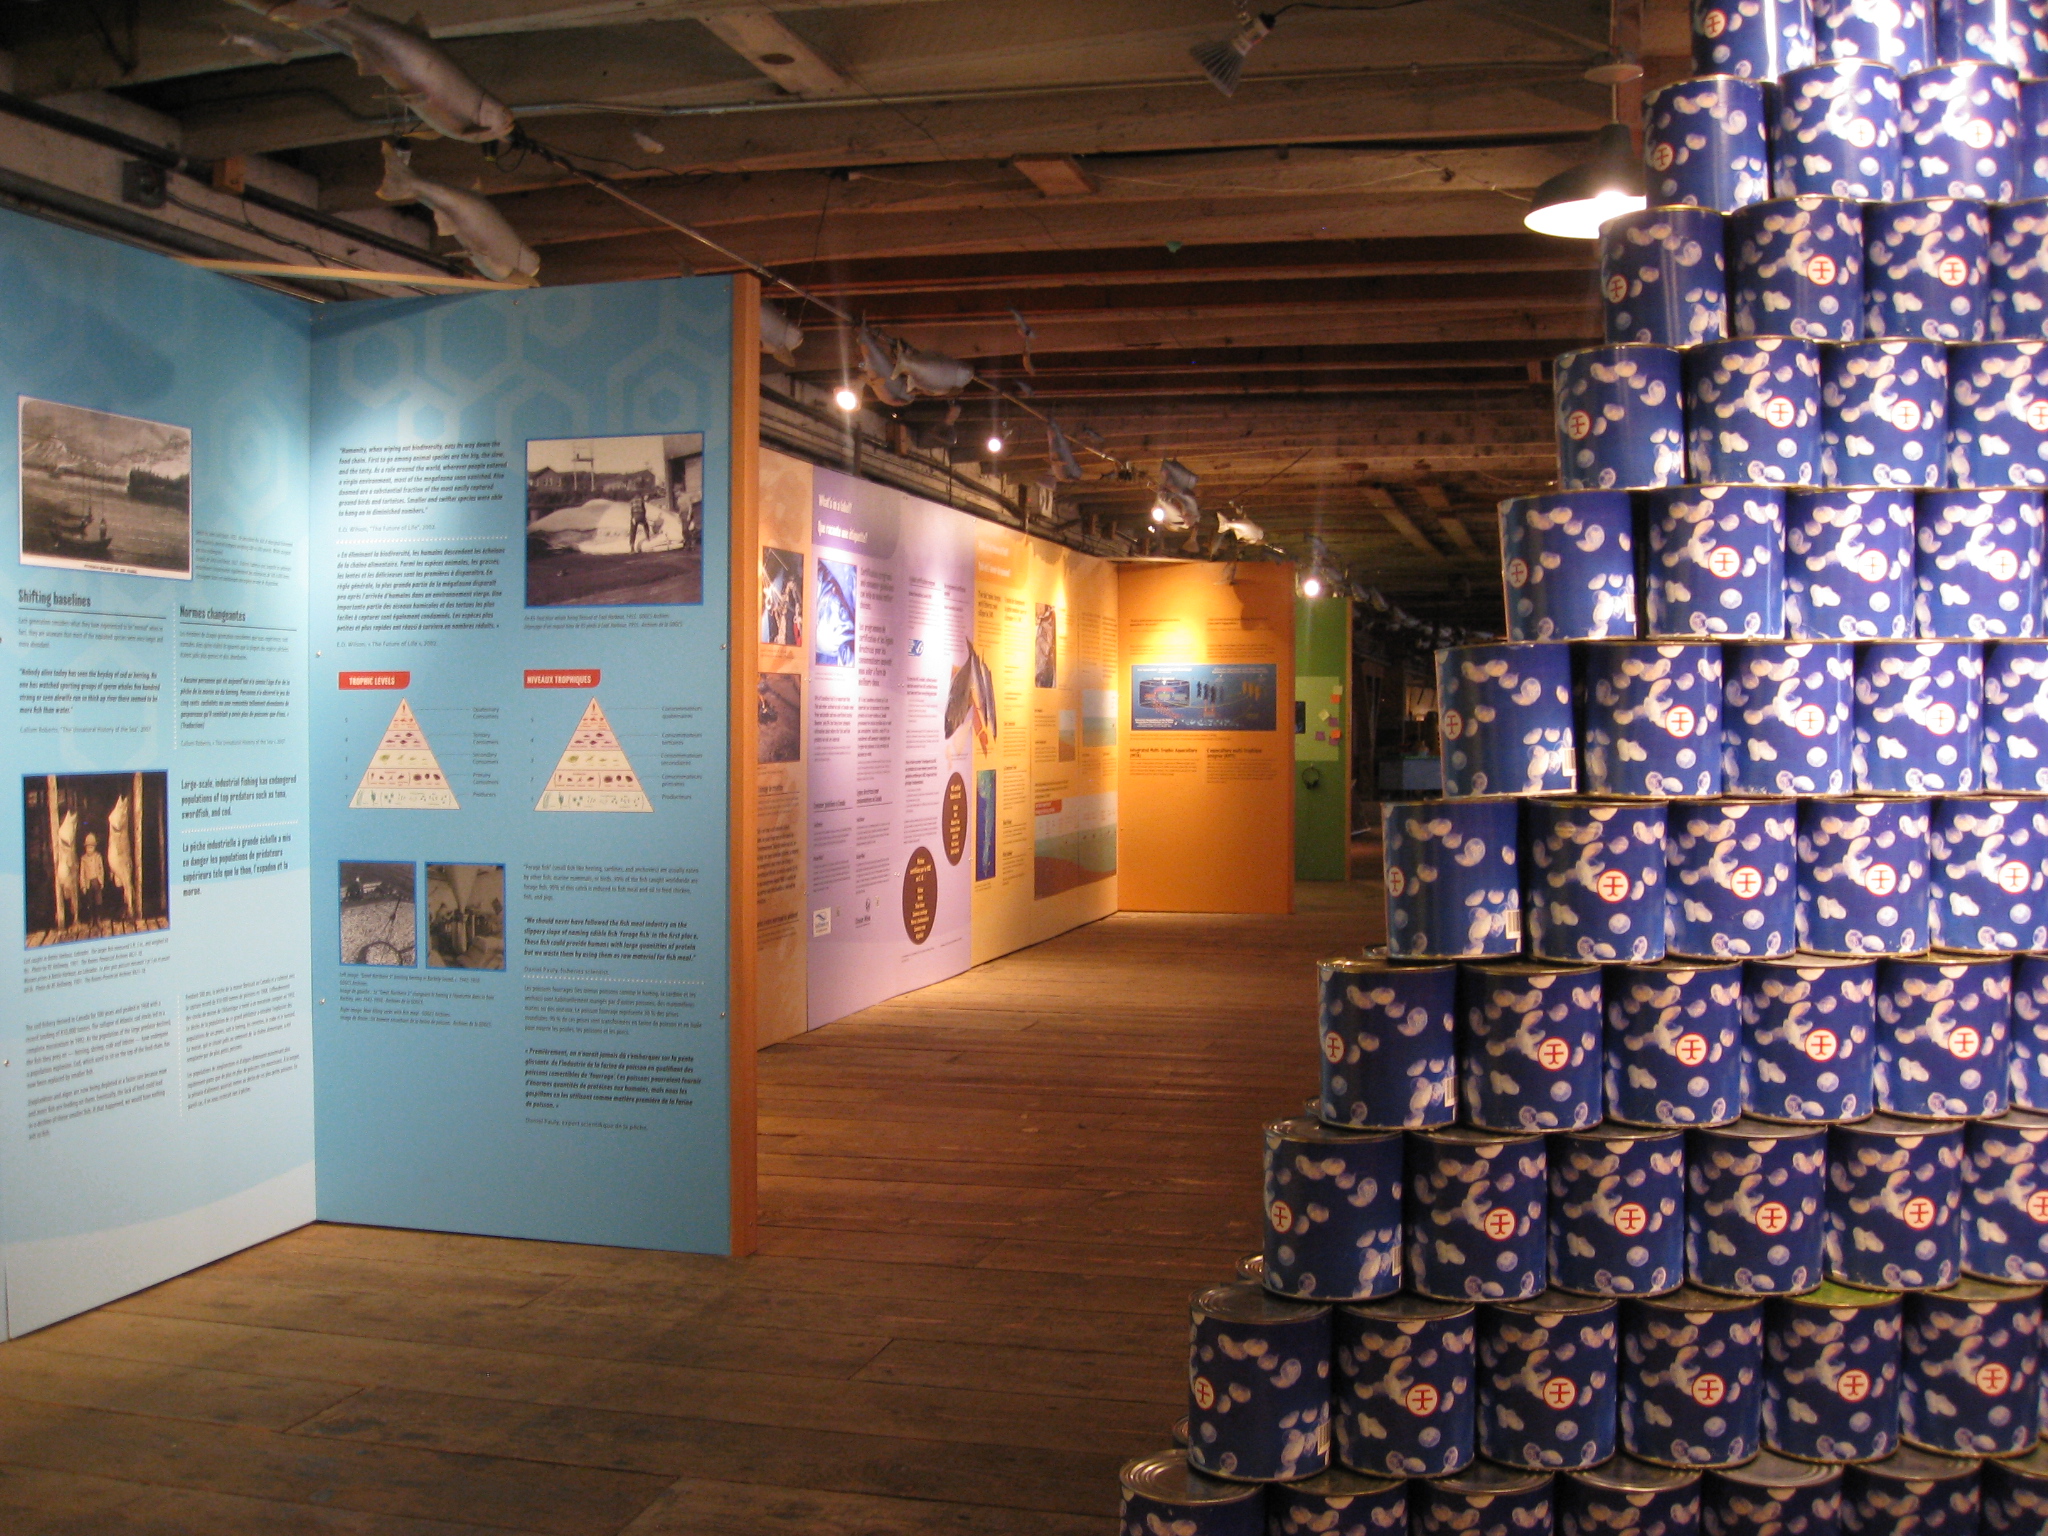 Temporary Exhibit “Seafood for Thought”.